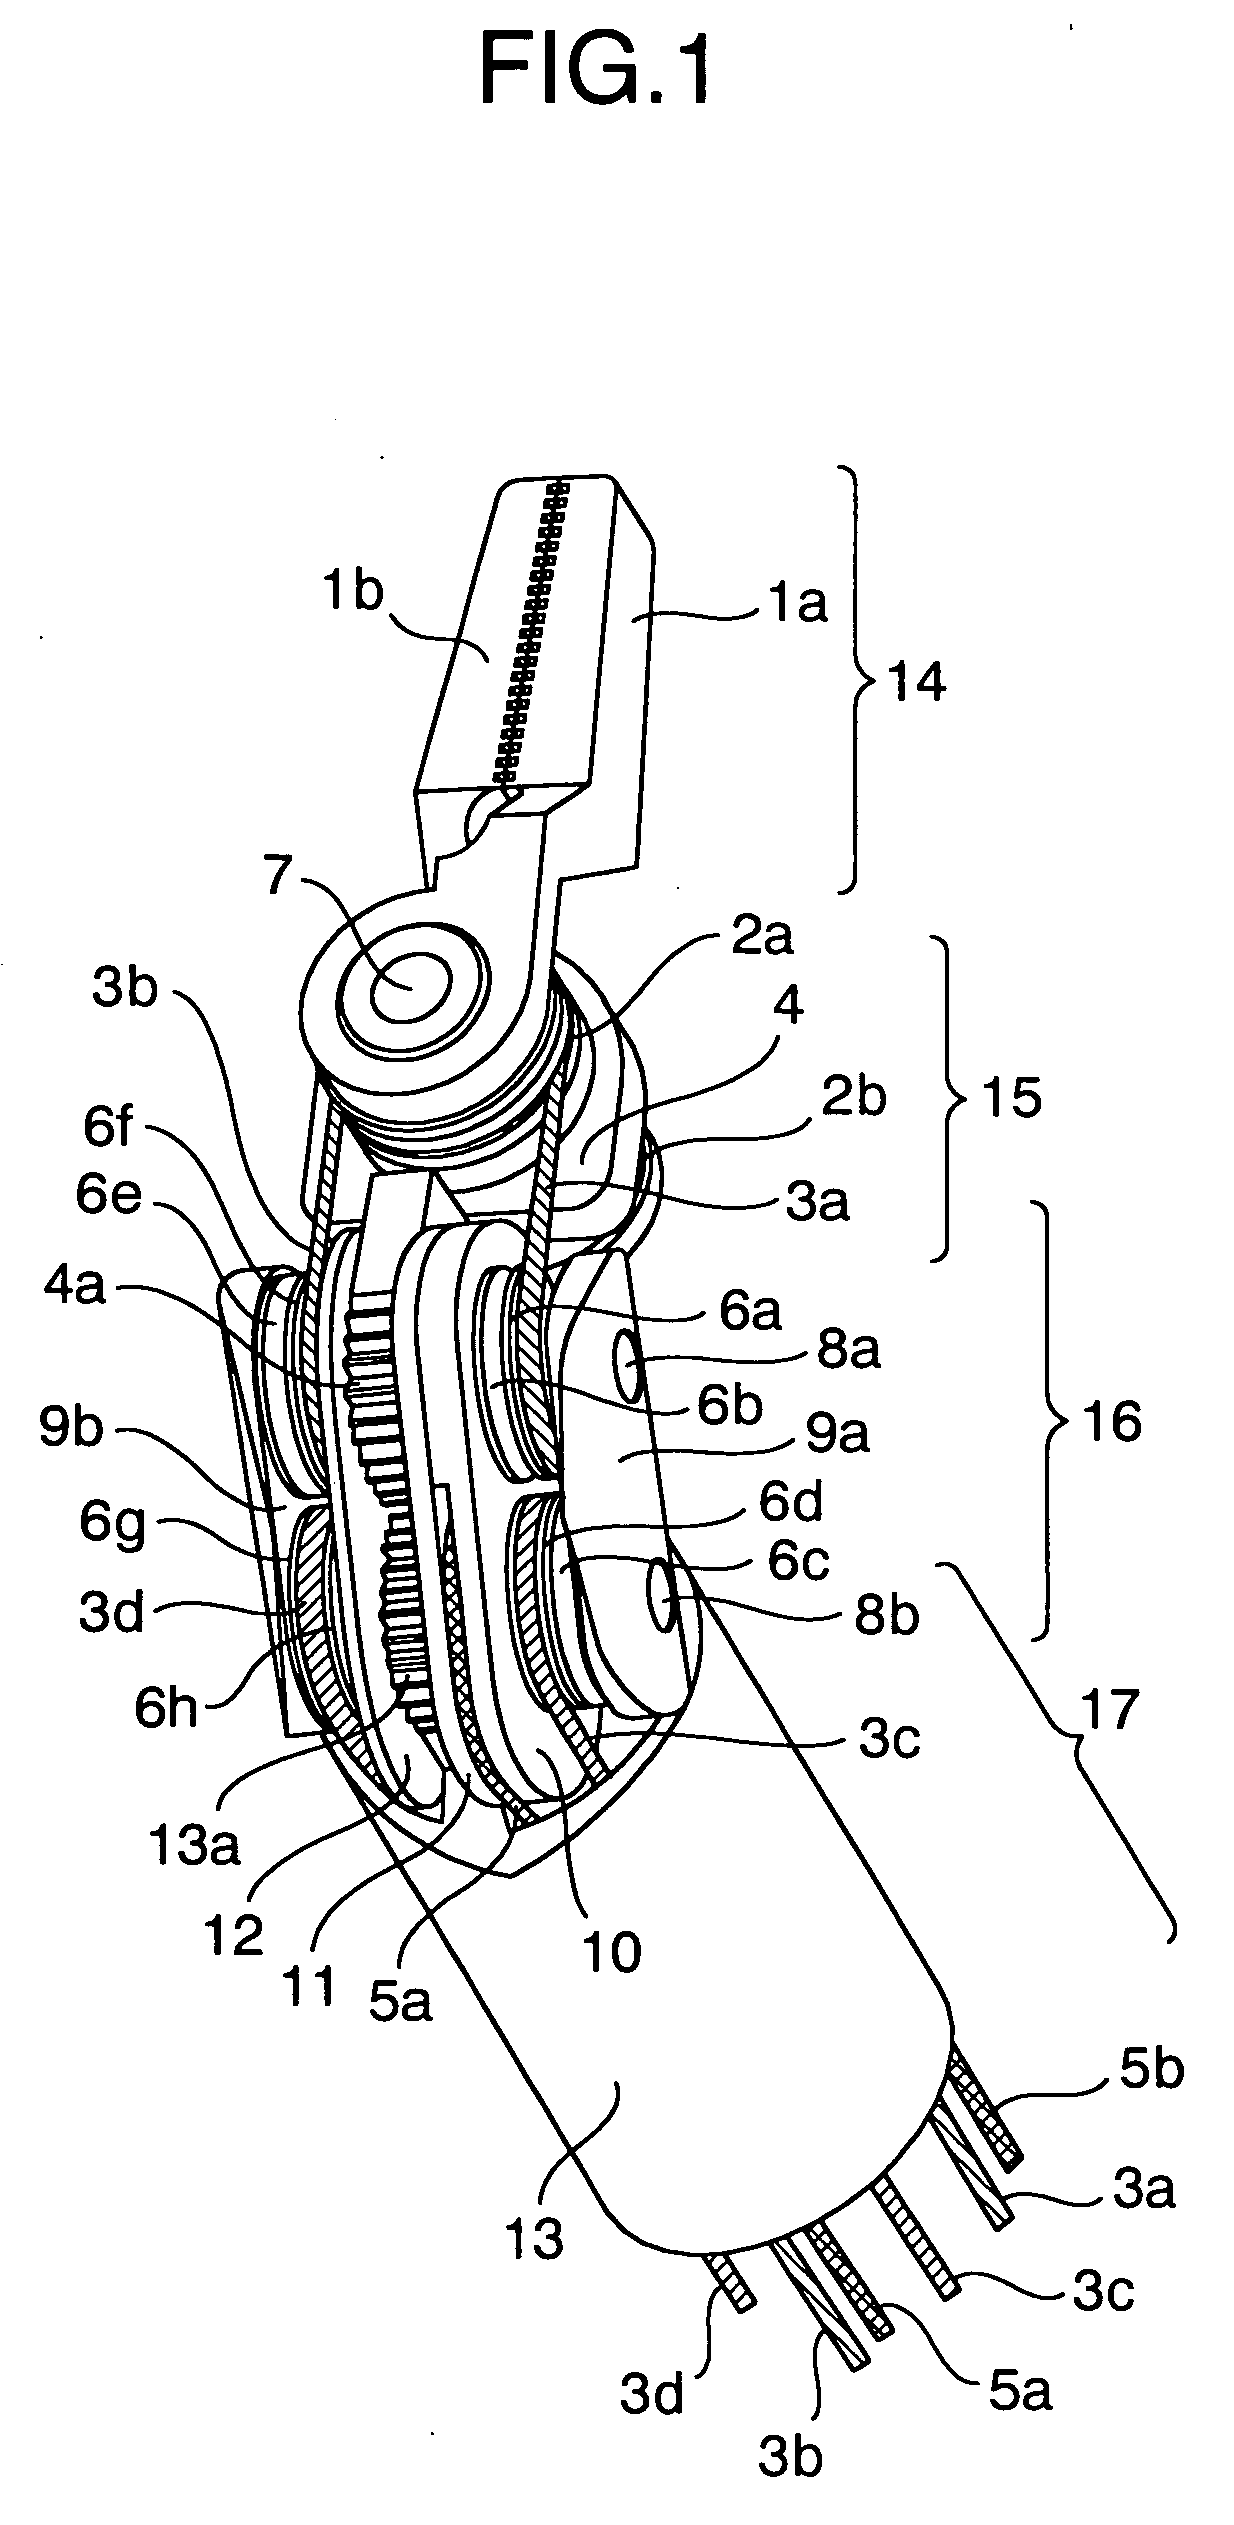 Surgical device